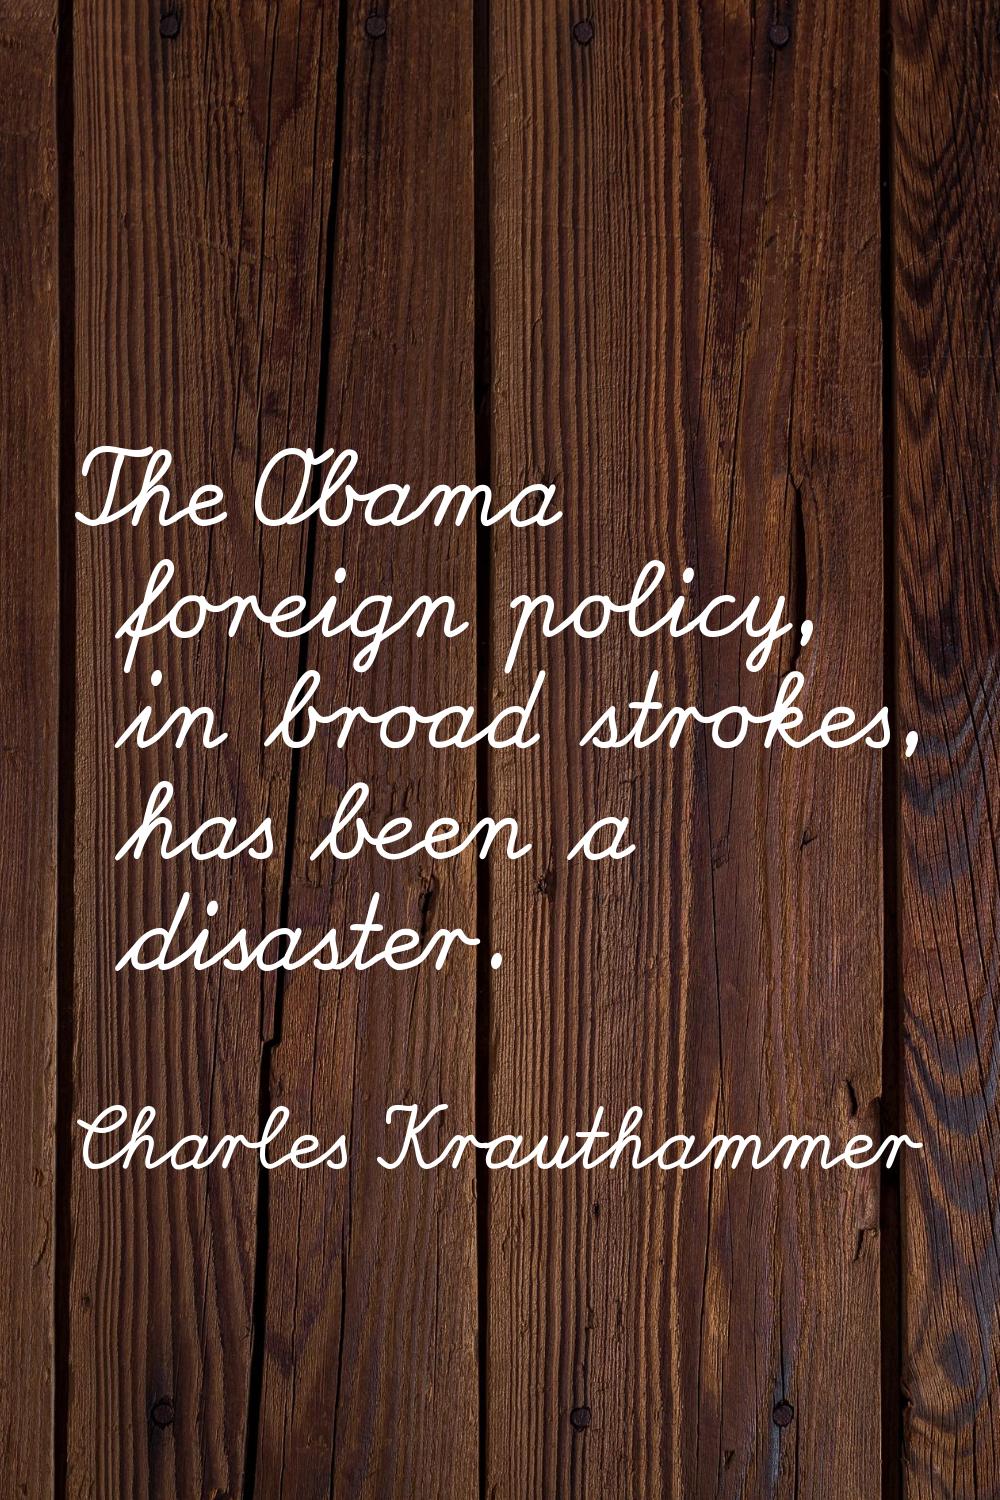 The Obama foreign policy, in broad strokes, has been a disaster.